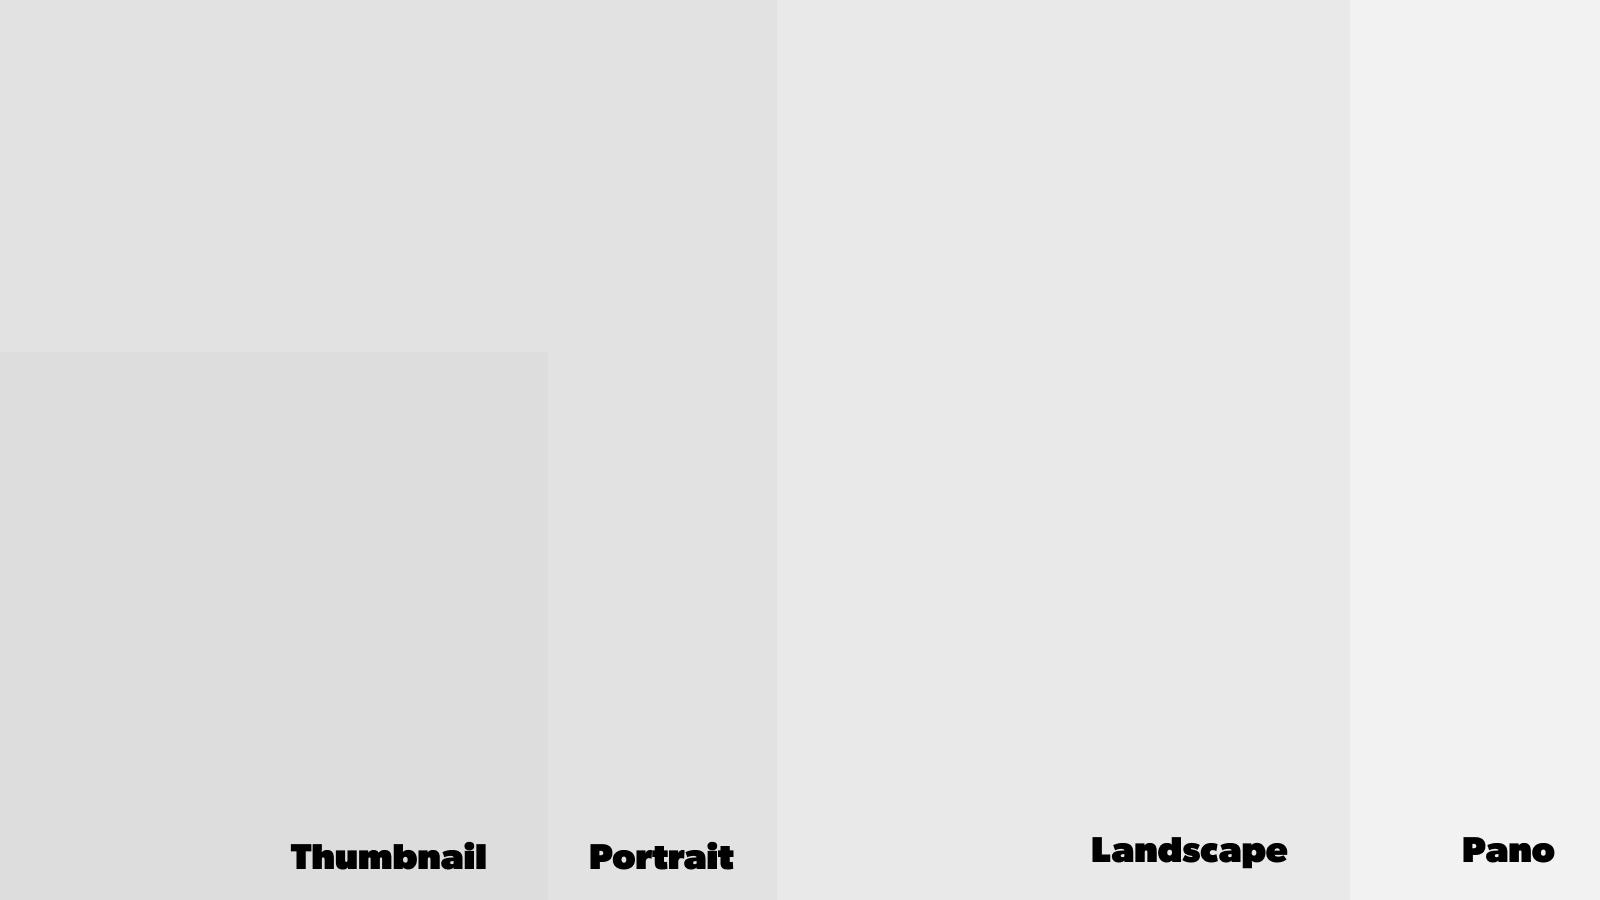 Image with shapes representing the different aspect ratios avaiable